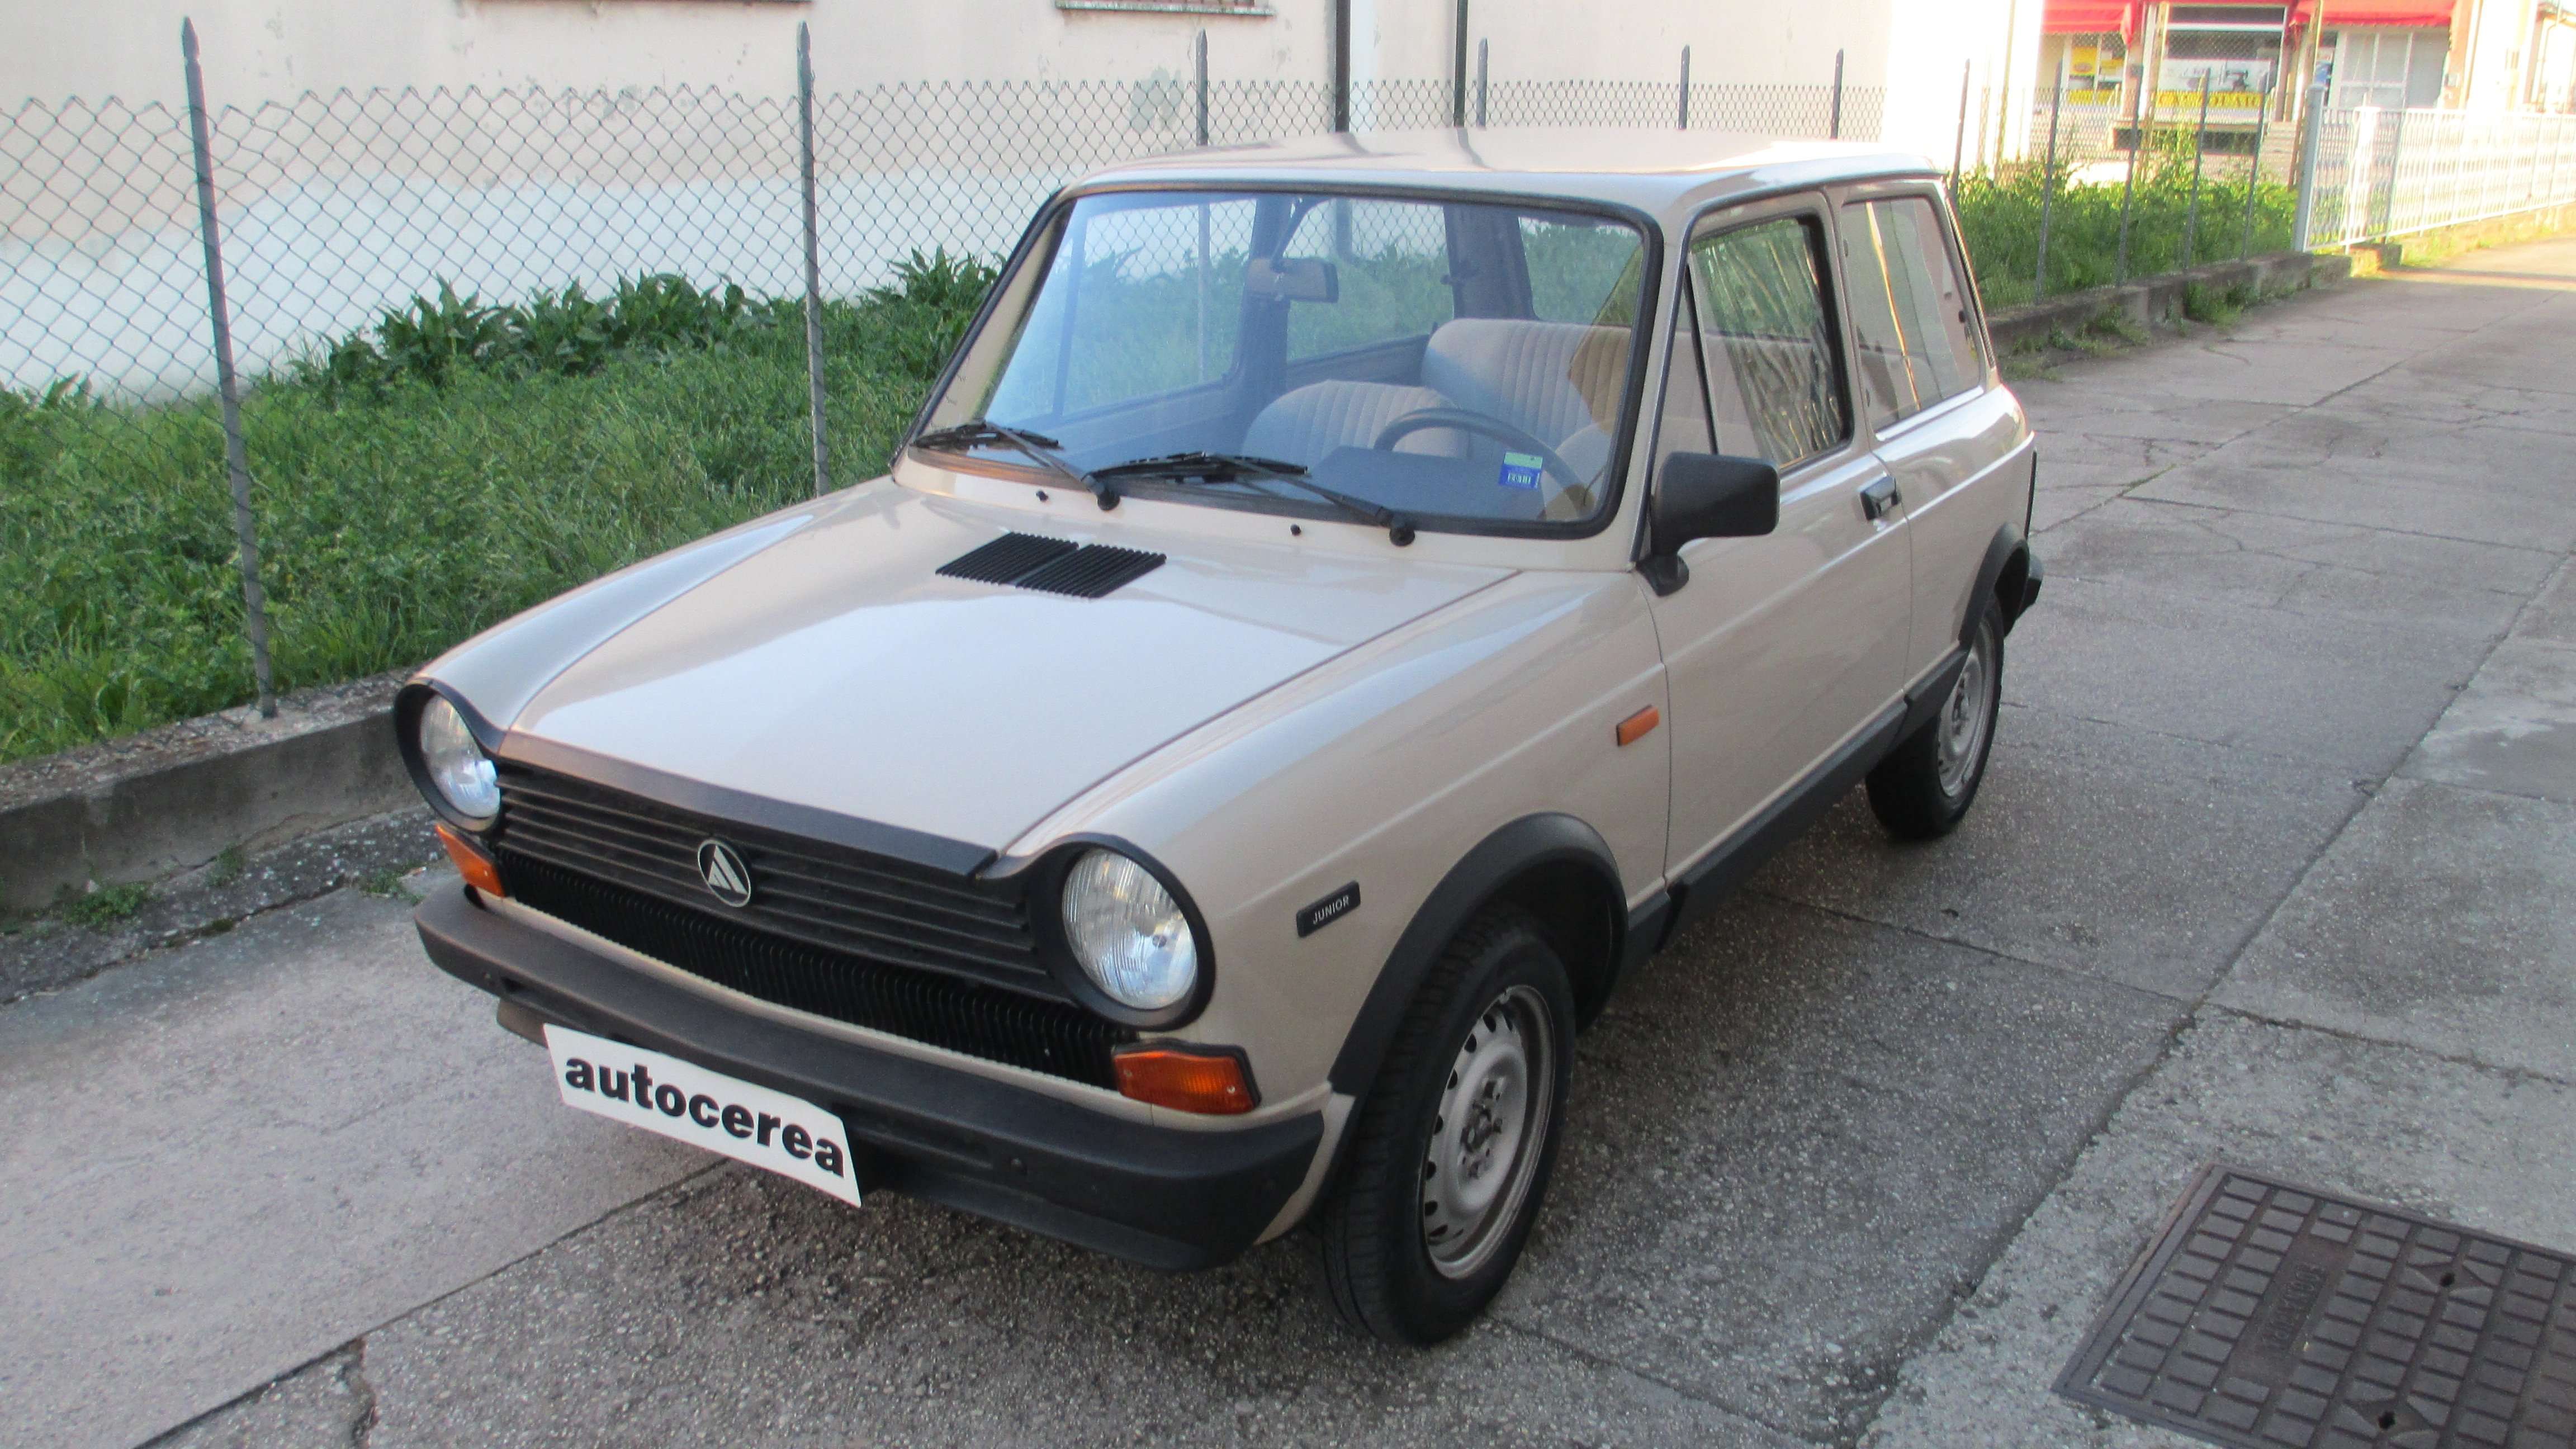 Autobianchi A 112 Compact in Beige used in Cerea - Verona - Vr for € 4,300.-